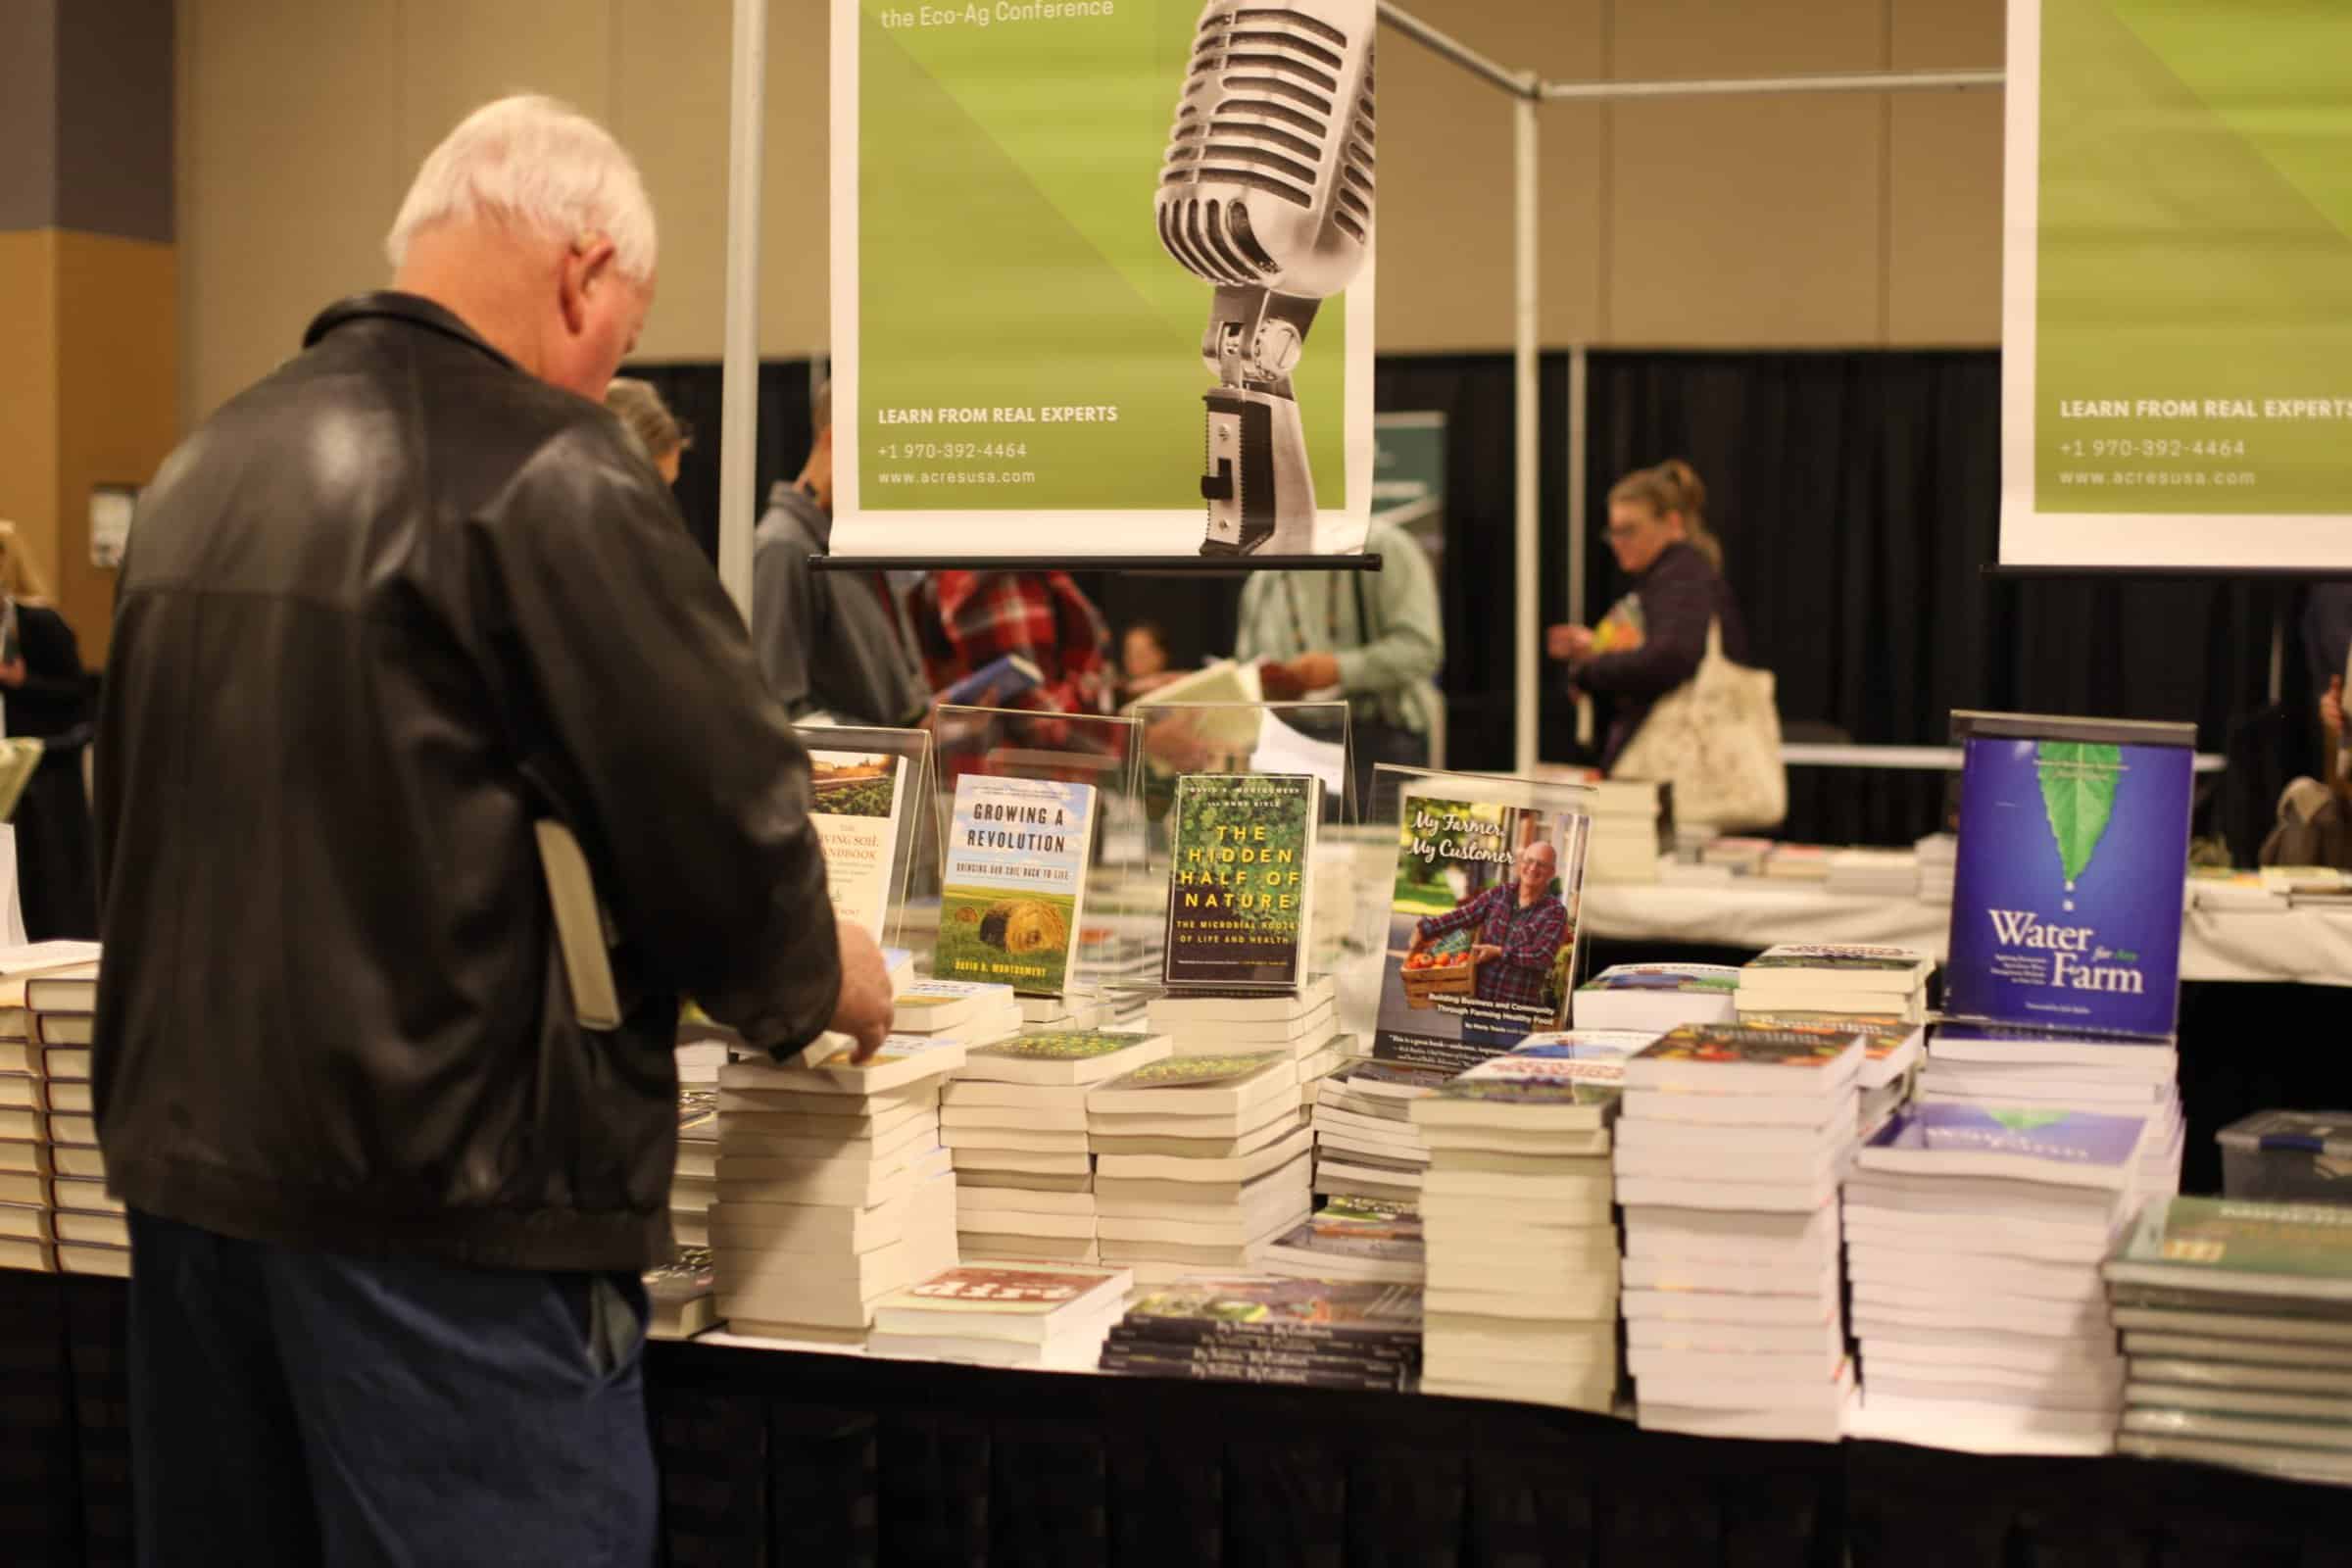 People browsing books at the Acres USA Eco-Ag Conference on-site bookstore